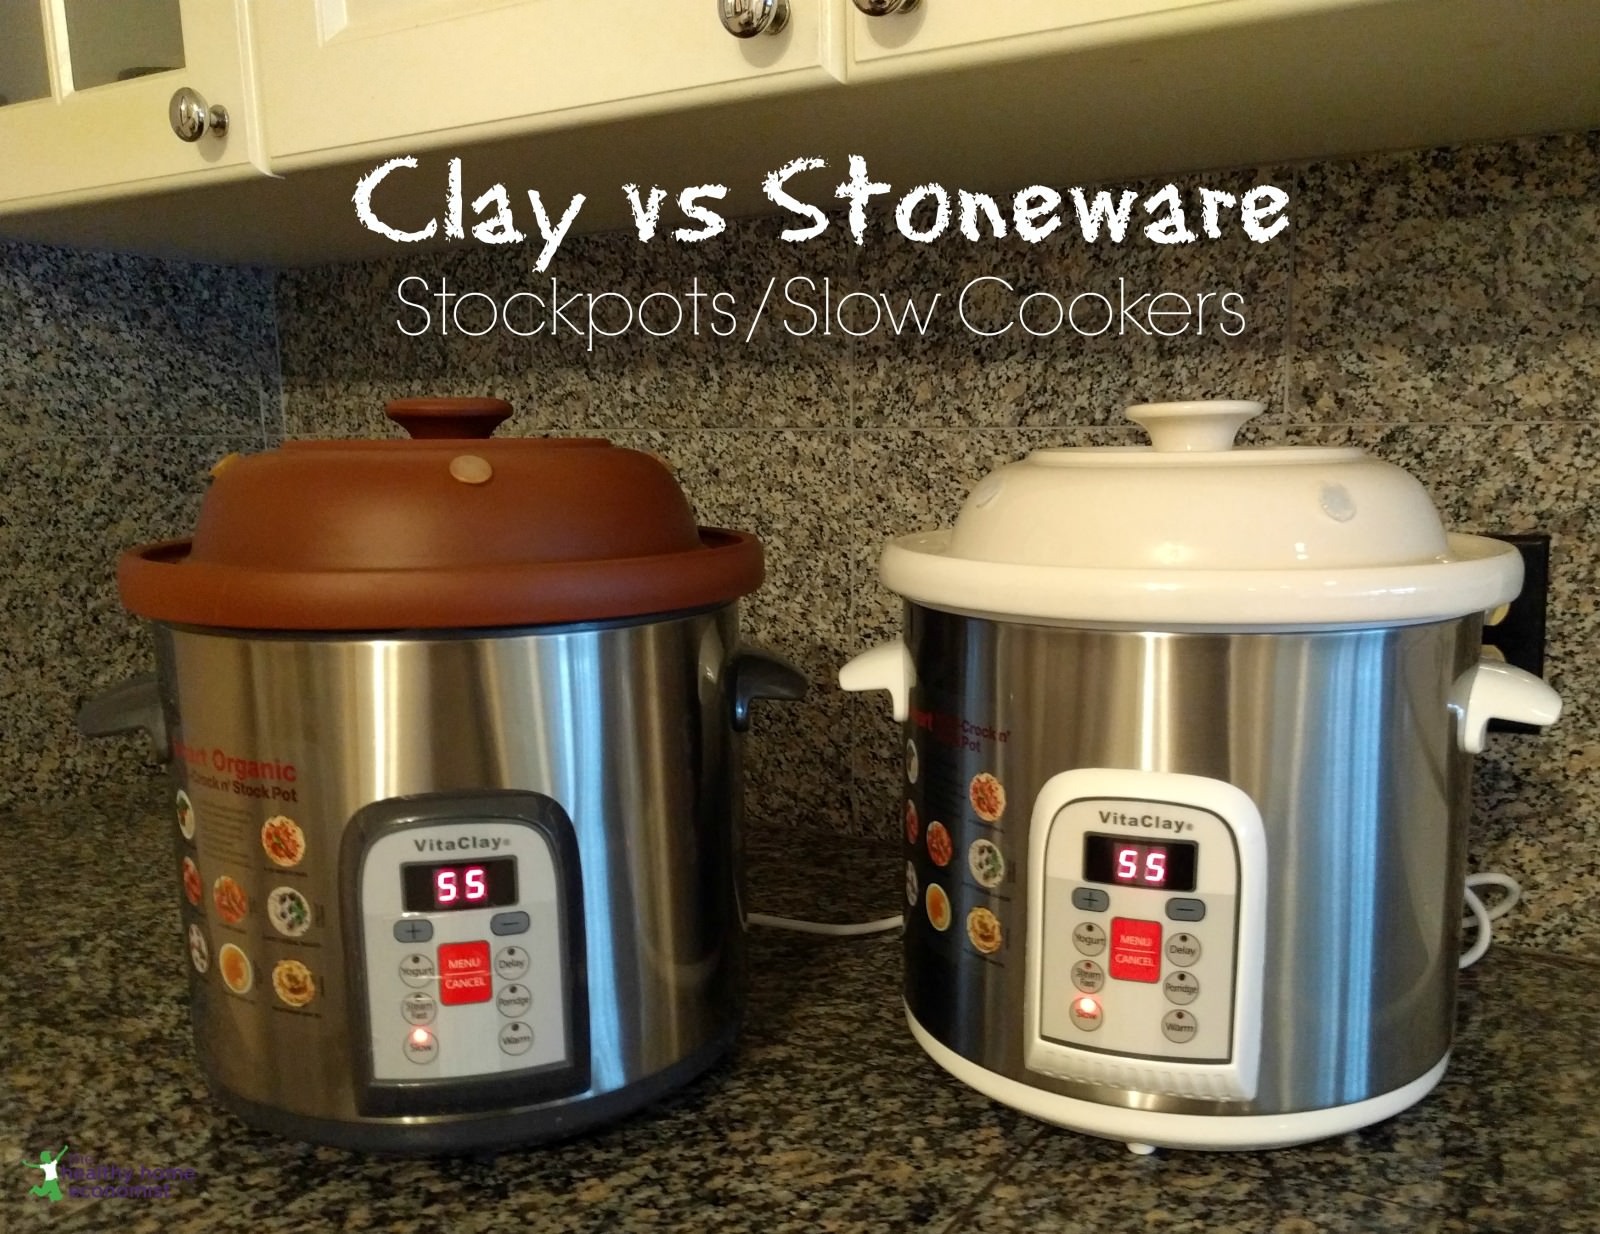 The VitaClay Chef Cooker; My honest review.